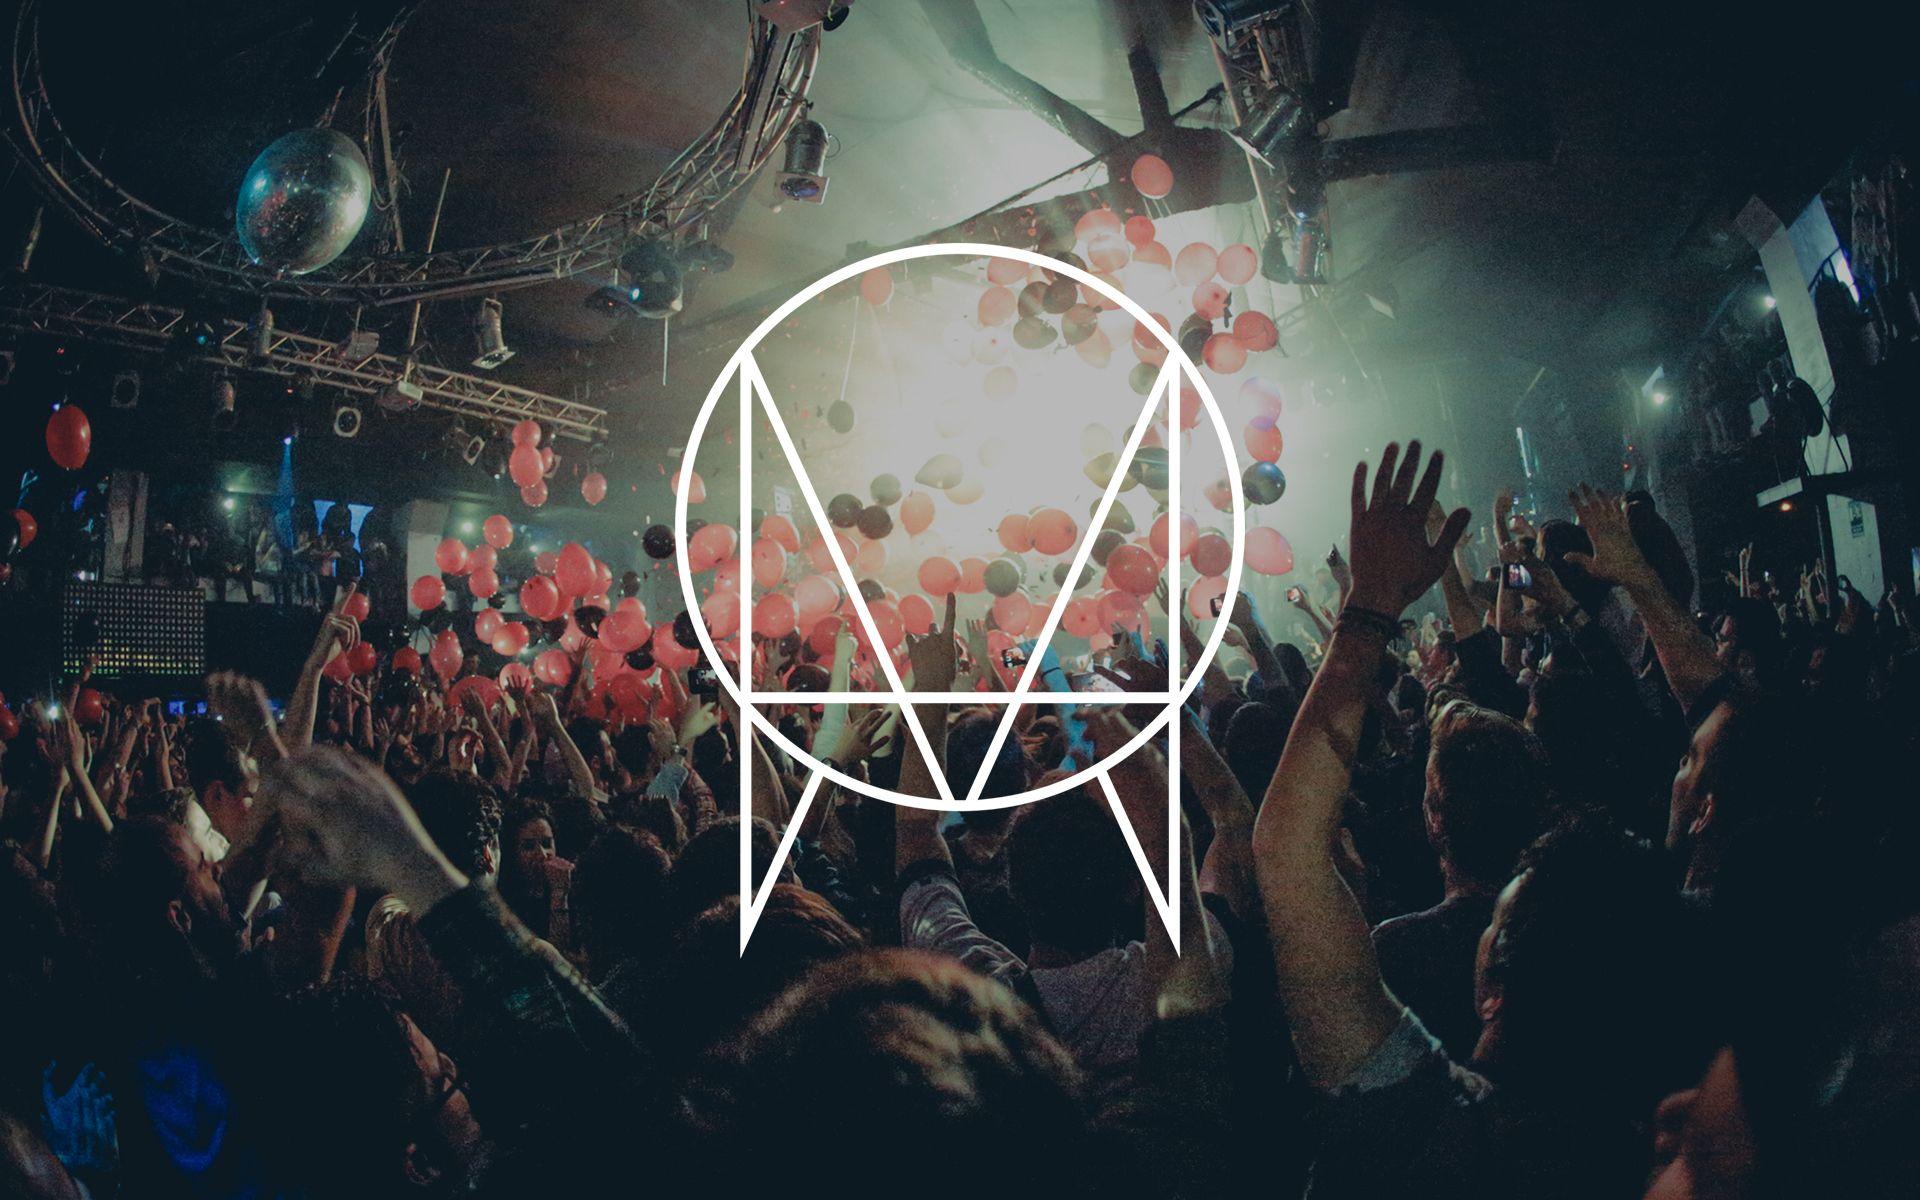 Skrillex Dropping New Tracks With OWSLA 'Worldwide Broadcast